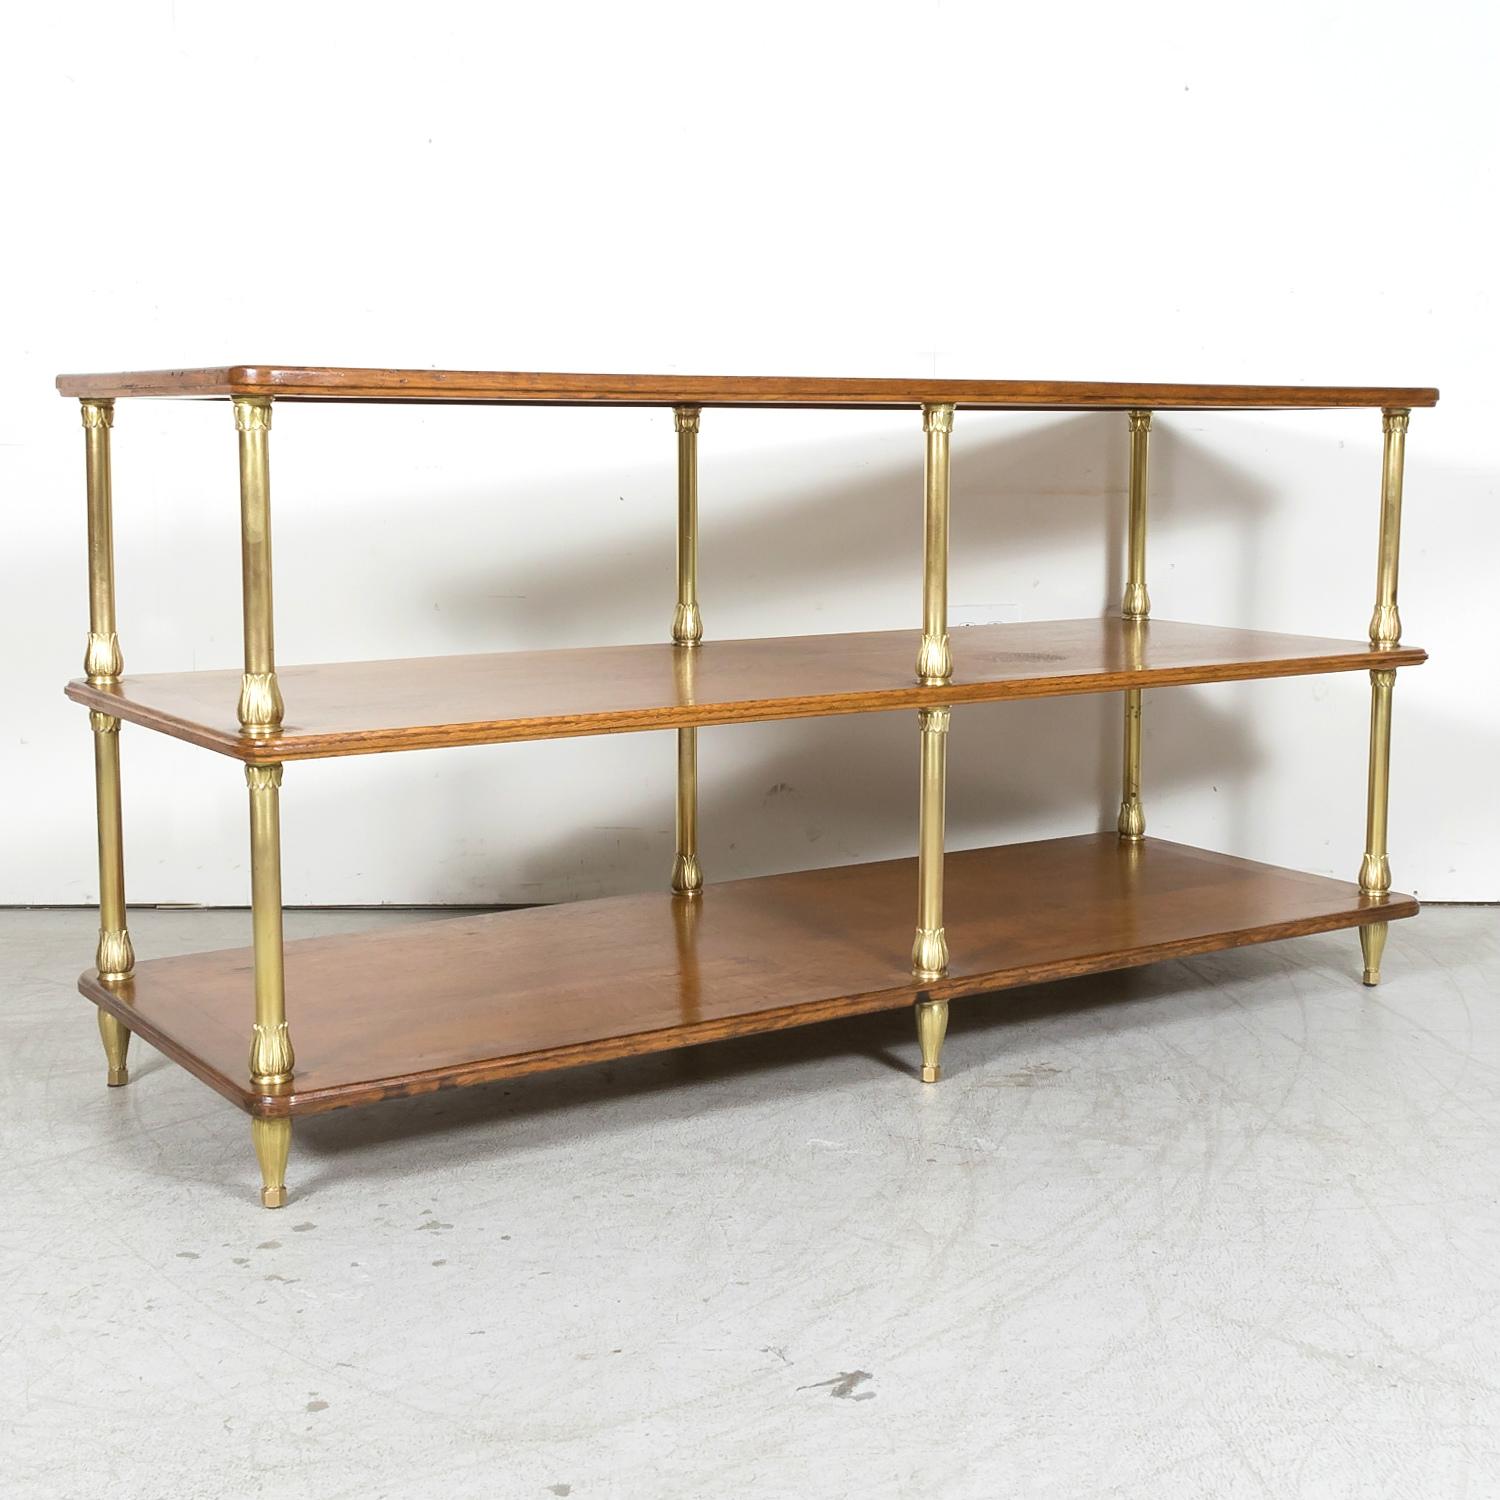 A rare early 20th century French Art Deco display table handcrafted of solid oak and brass in the Île de France region, circa 1930s. Found in a ladies clothing atelier in the heart of the Left Bank in the Saint Germain des Pres neighborhood of